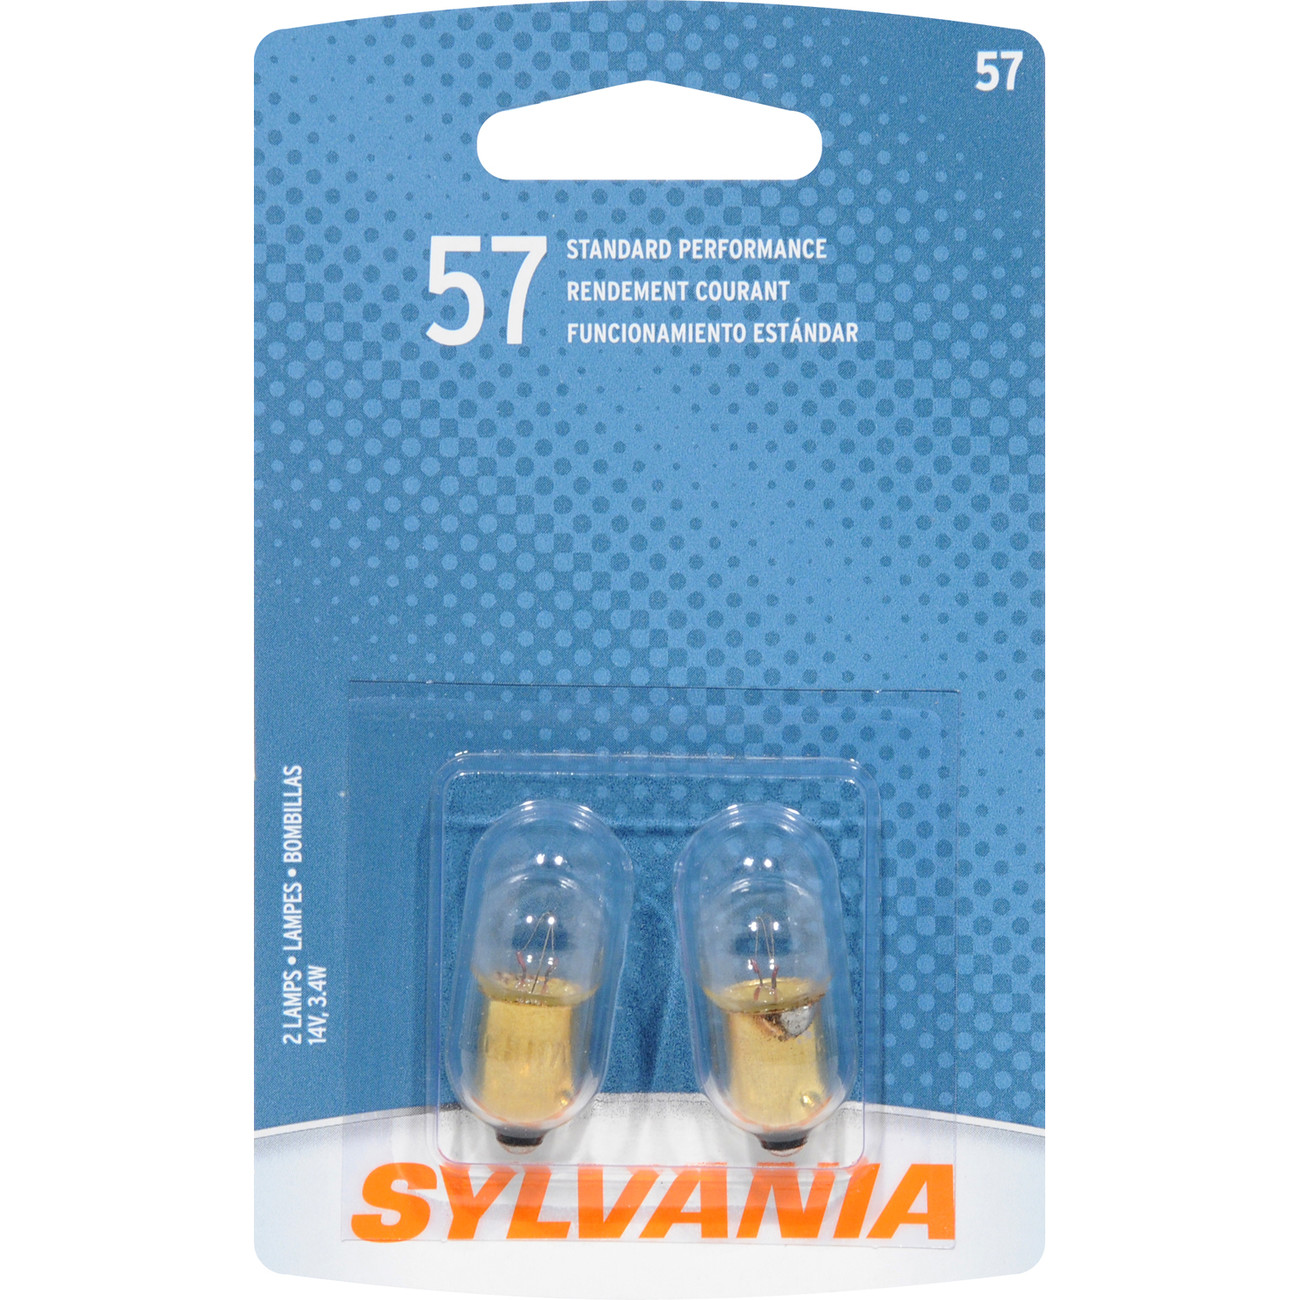 SYLVANIA RETAIL PACKS - Blister Pack Twin Ignition Light - SYR 57.BP2